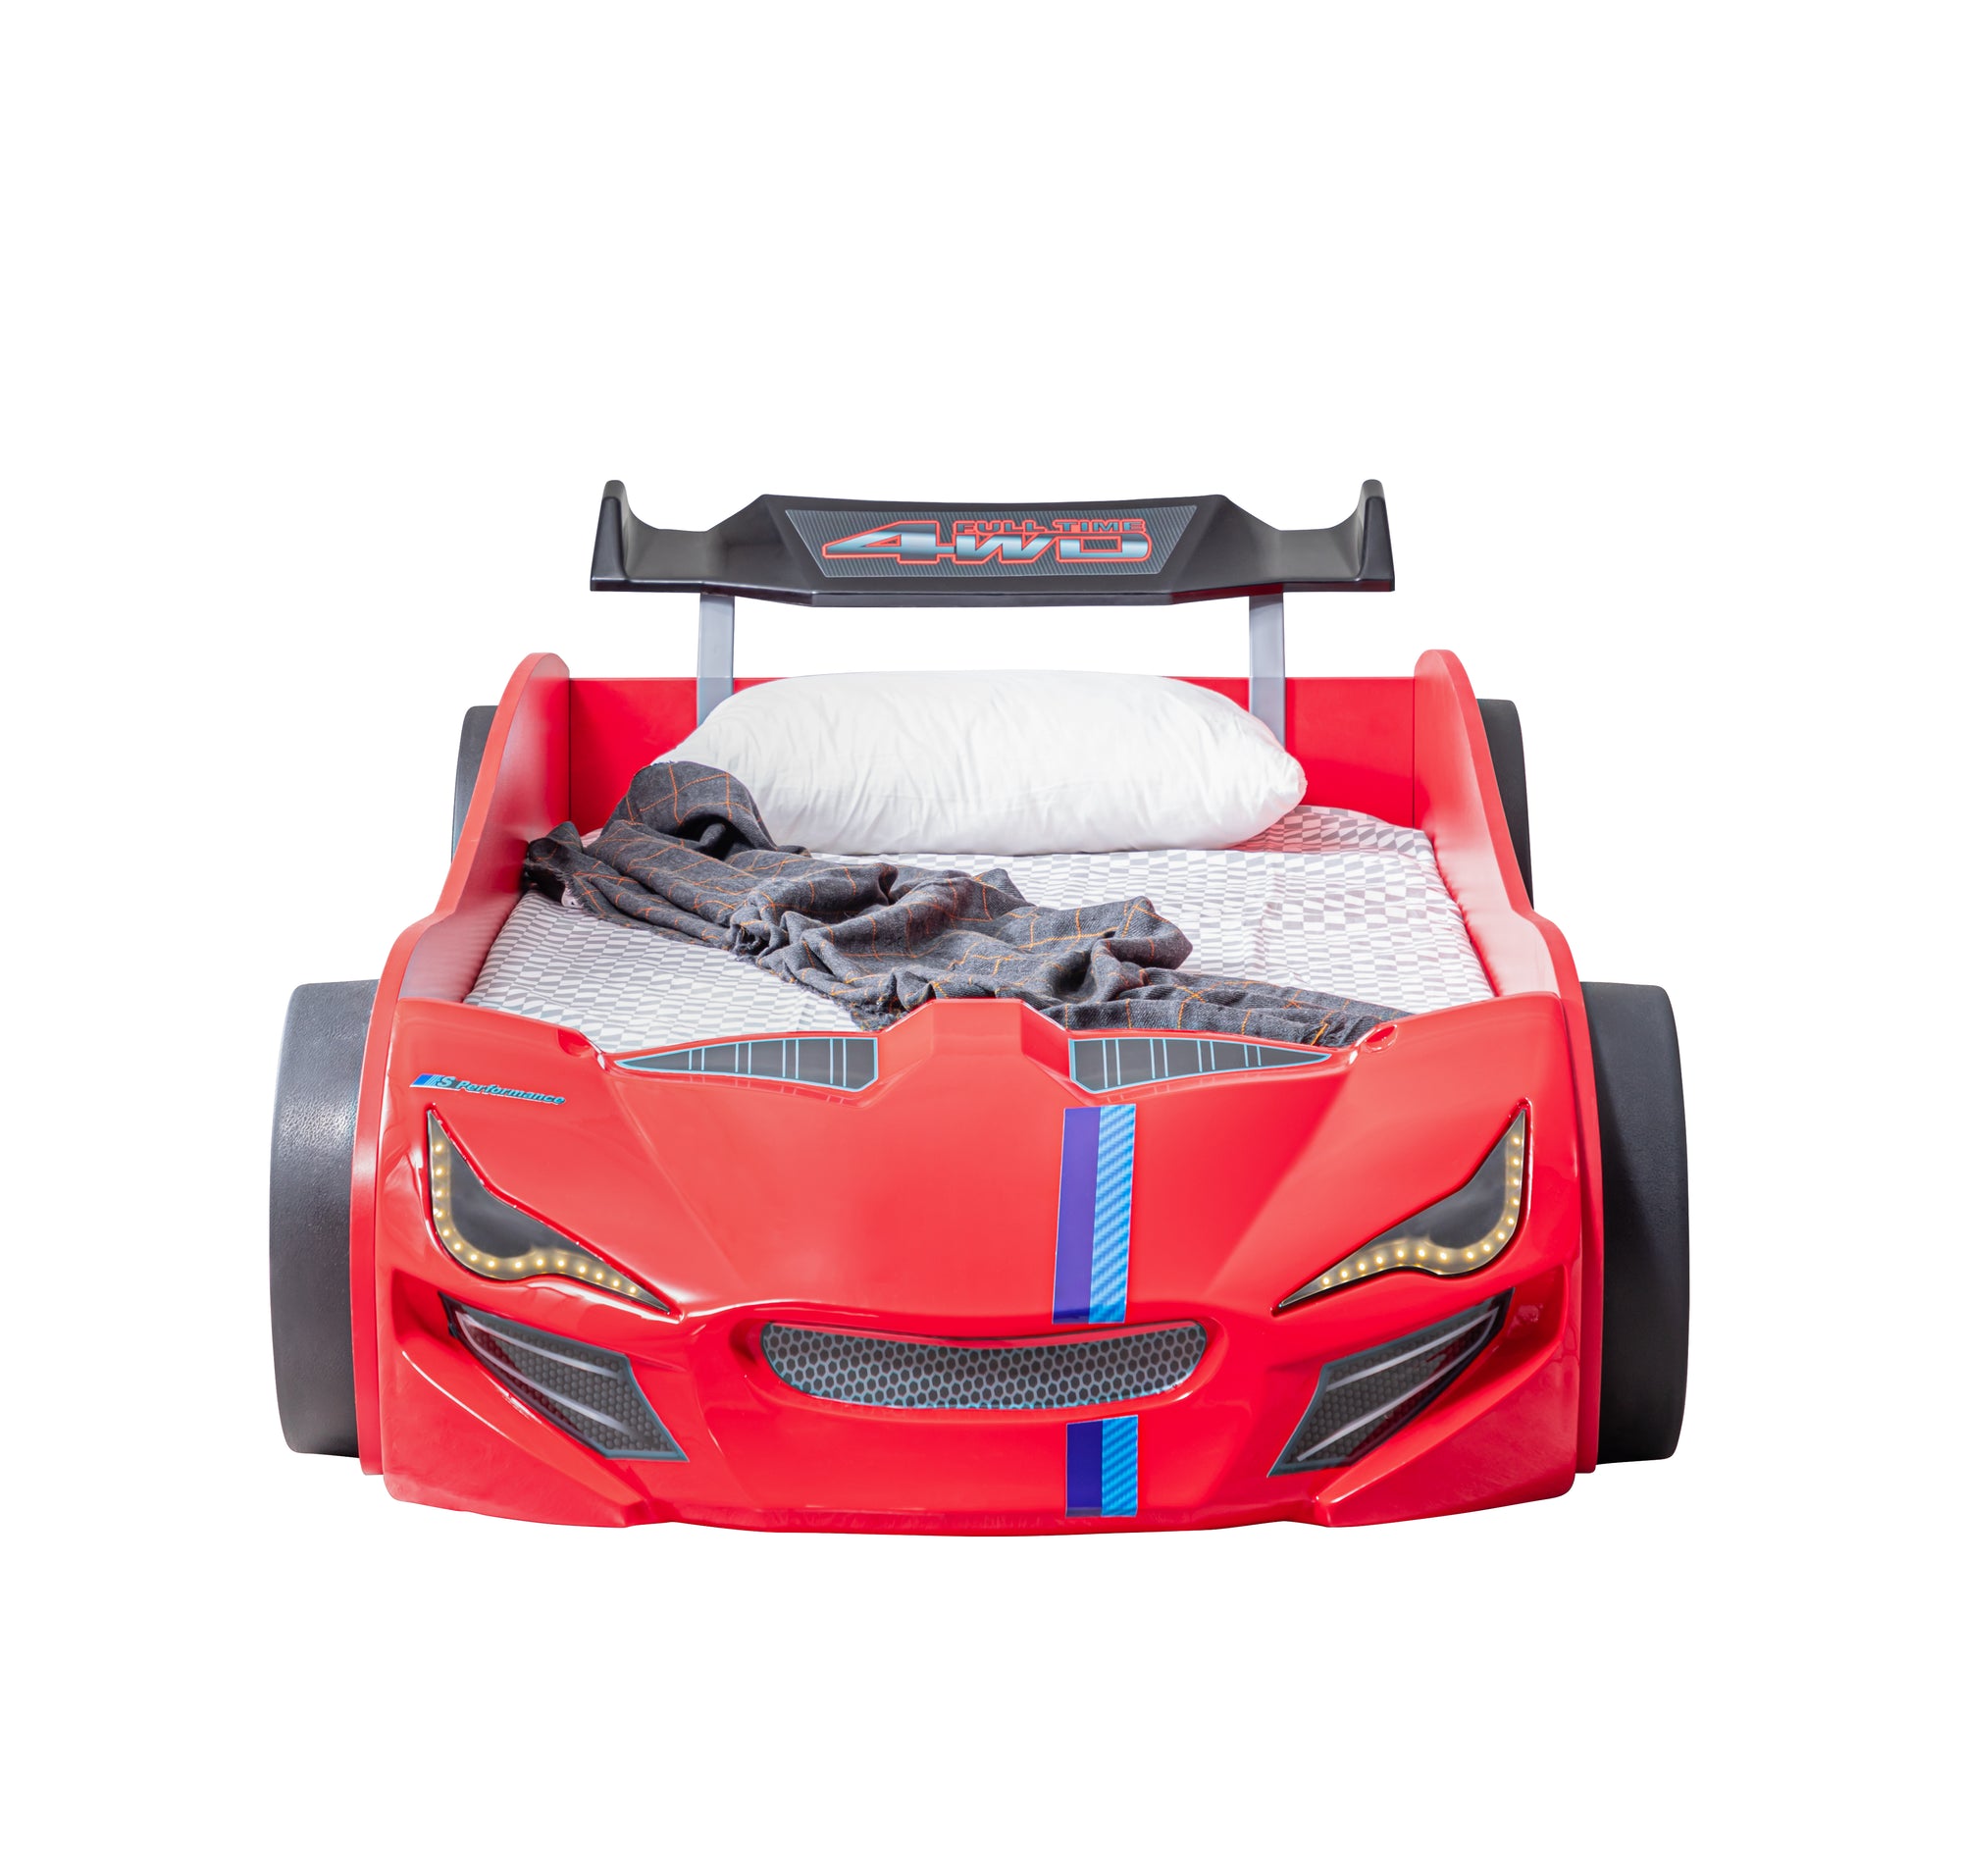 GT Eco Speed 3FT Single Children's Novelty Red Racing Car Bed with Hea -  Chic Concept